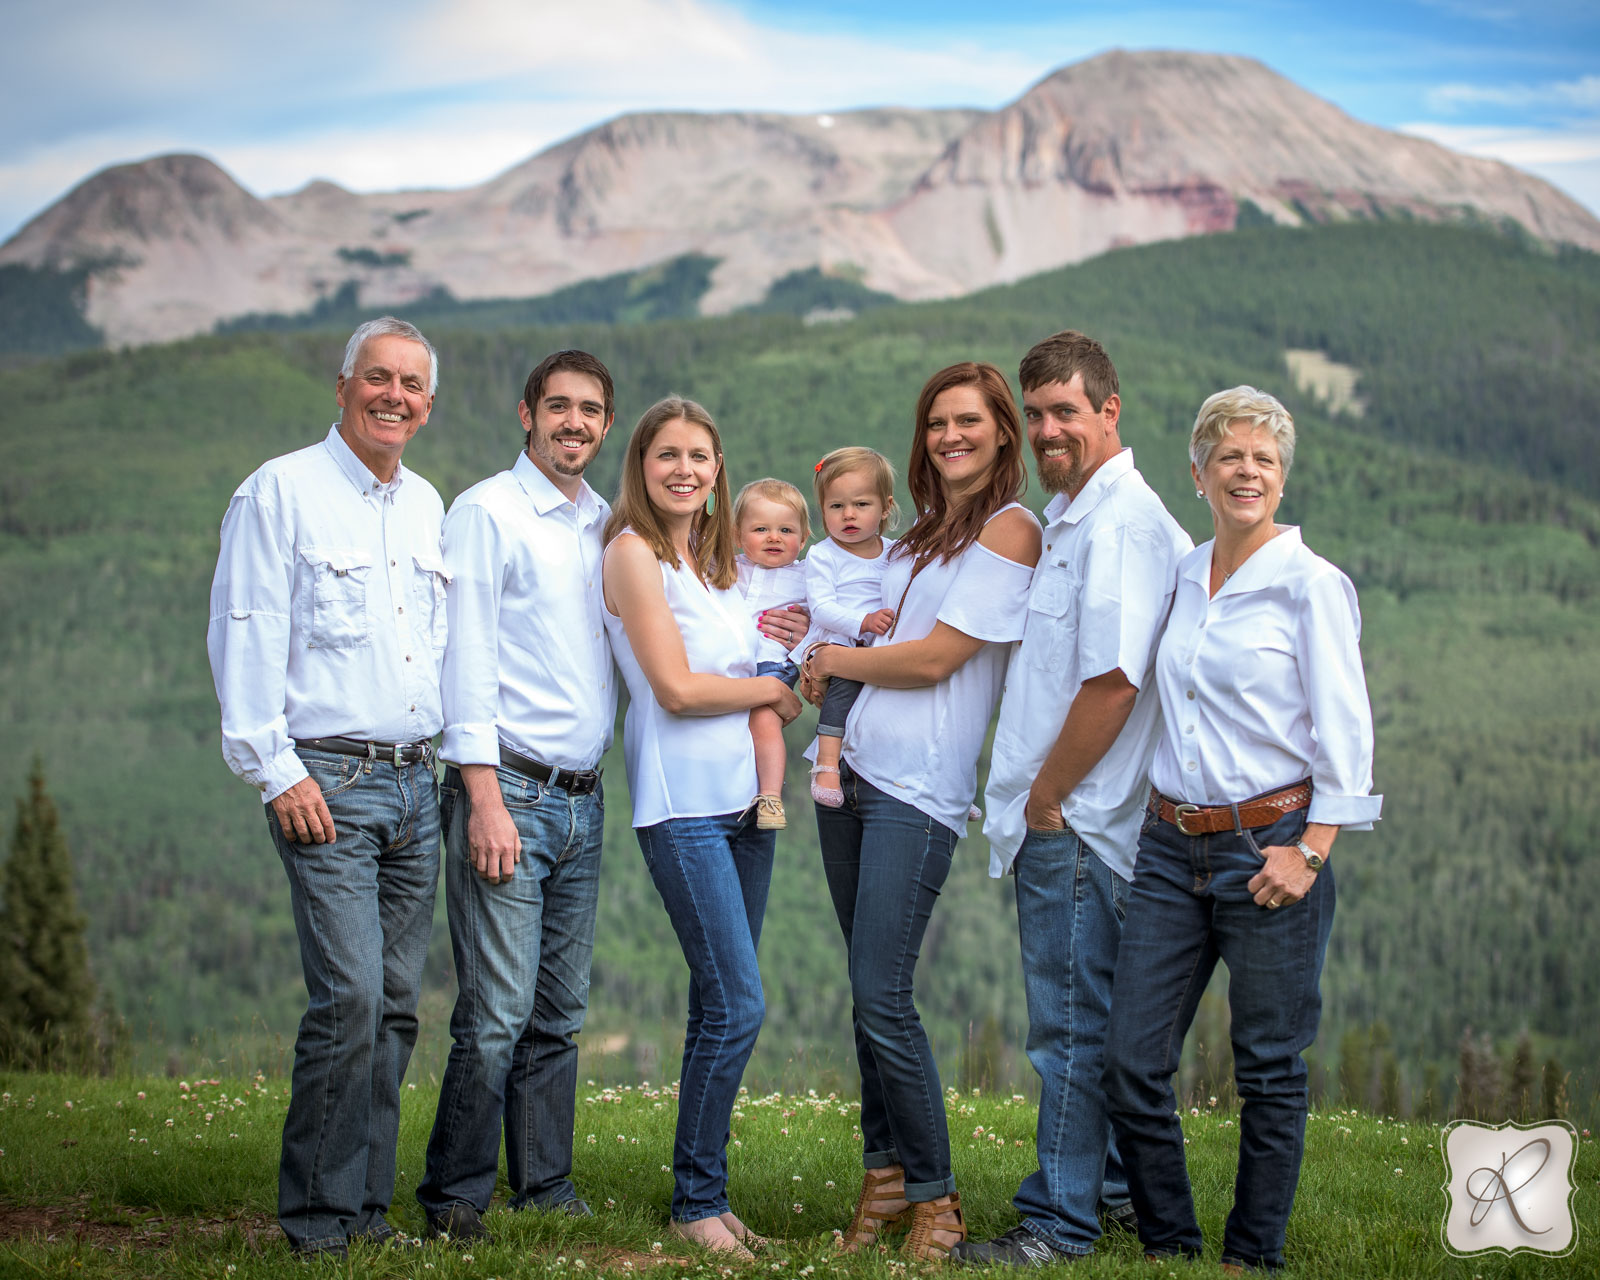 Family Portraits in the Mountains of Durango Colorado Photographed by Professional Photographer Allison Ragsdale Photography